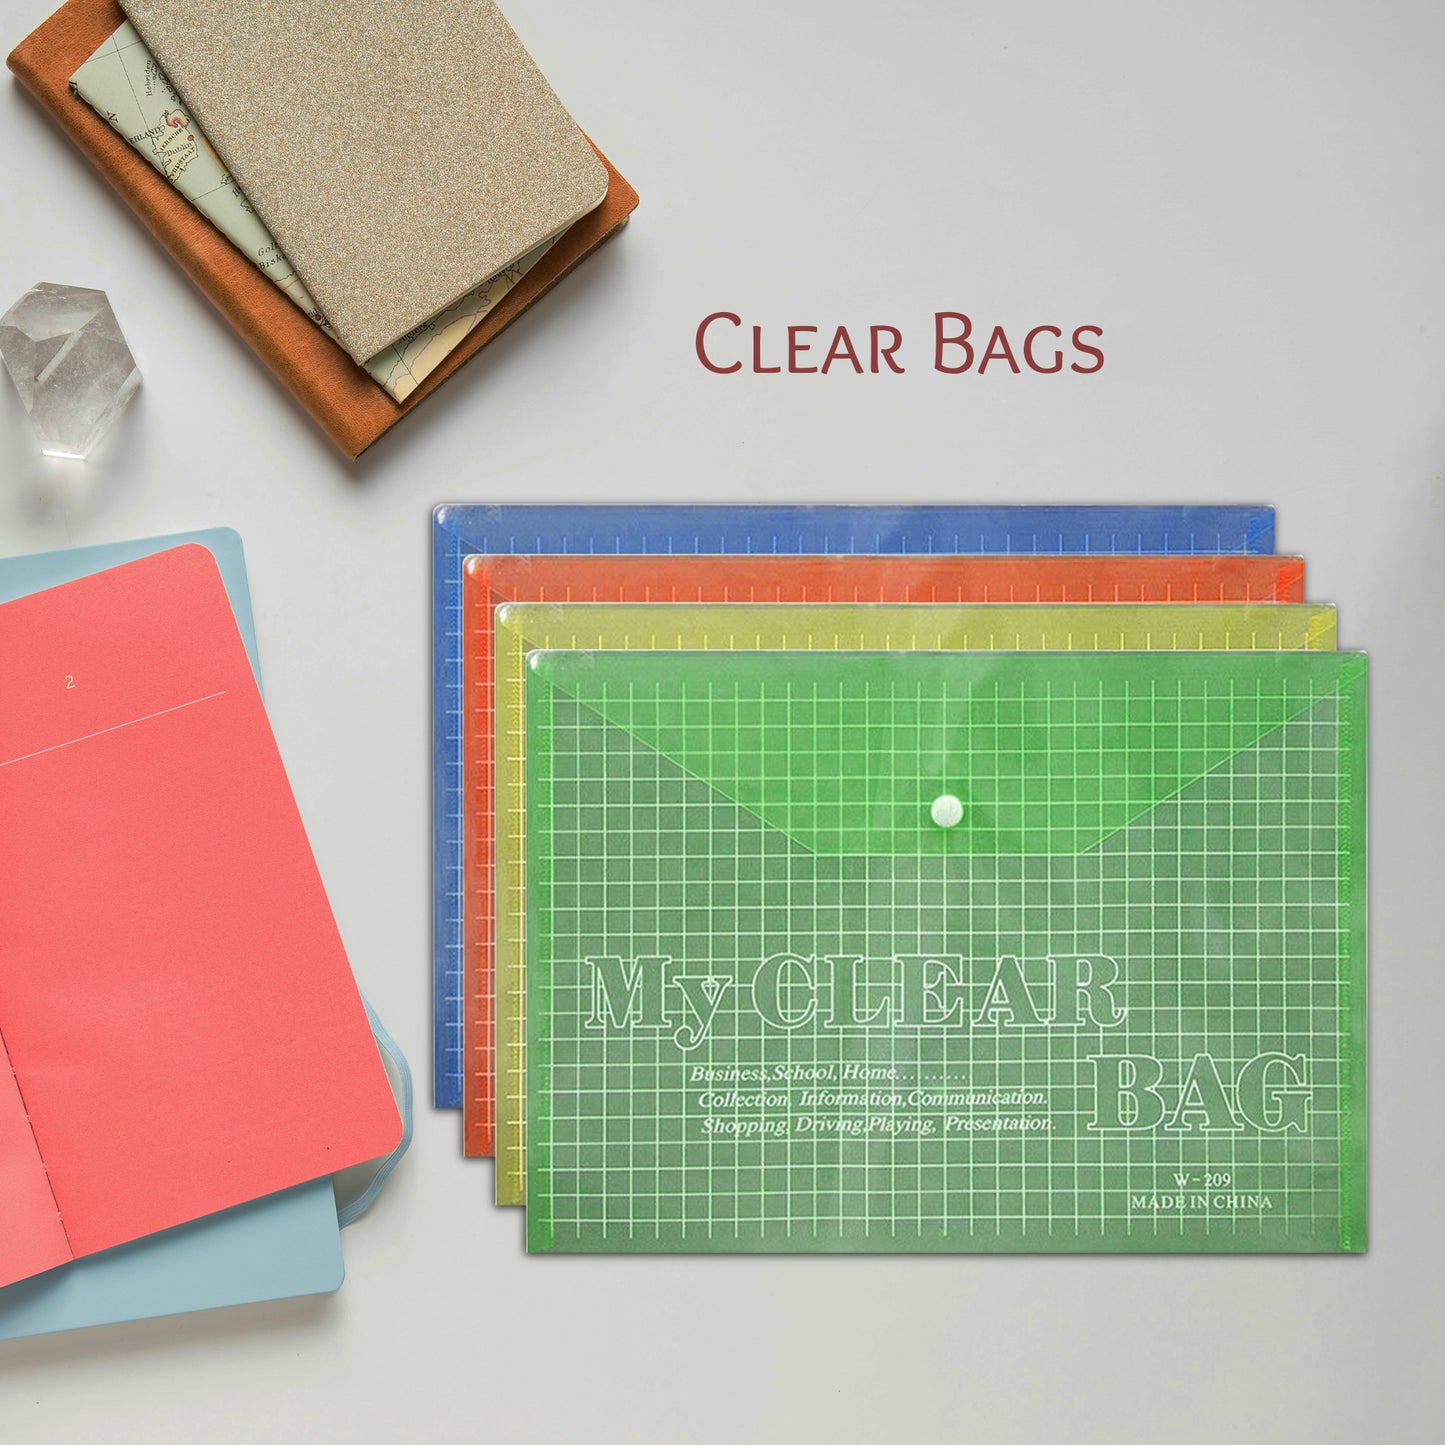 Snap Button Closure Clear Bags